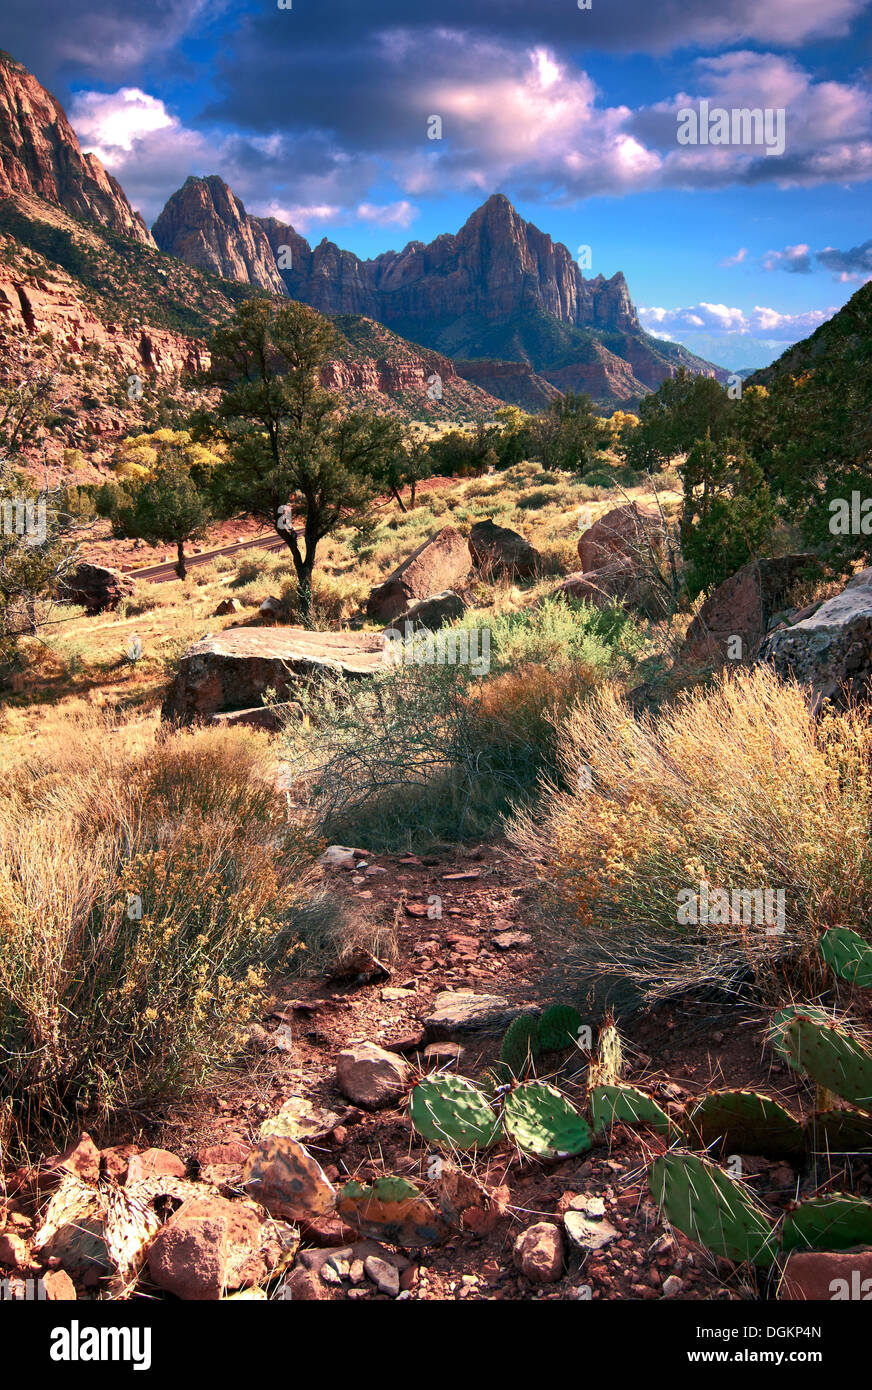 A view of the mountains of Zion National Park. Stock Photo